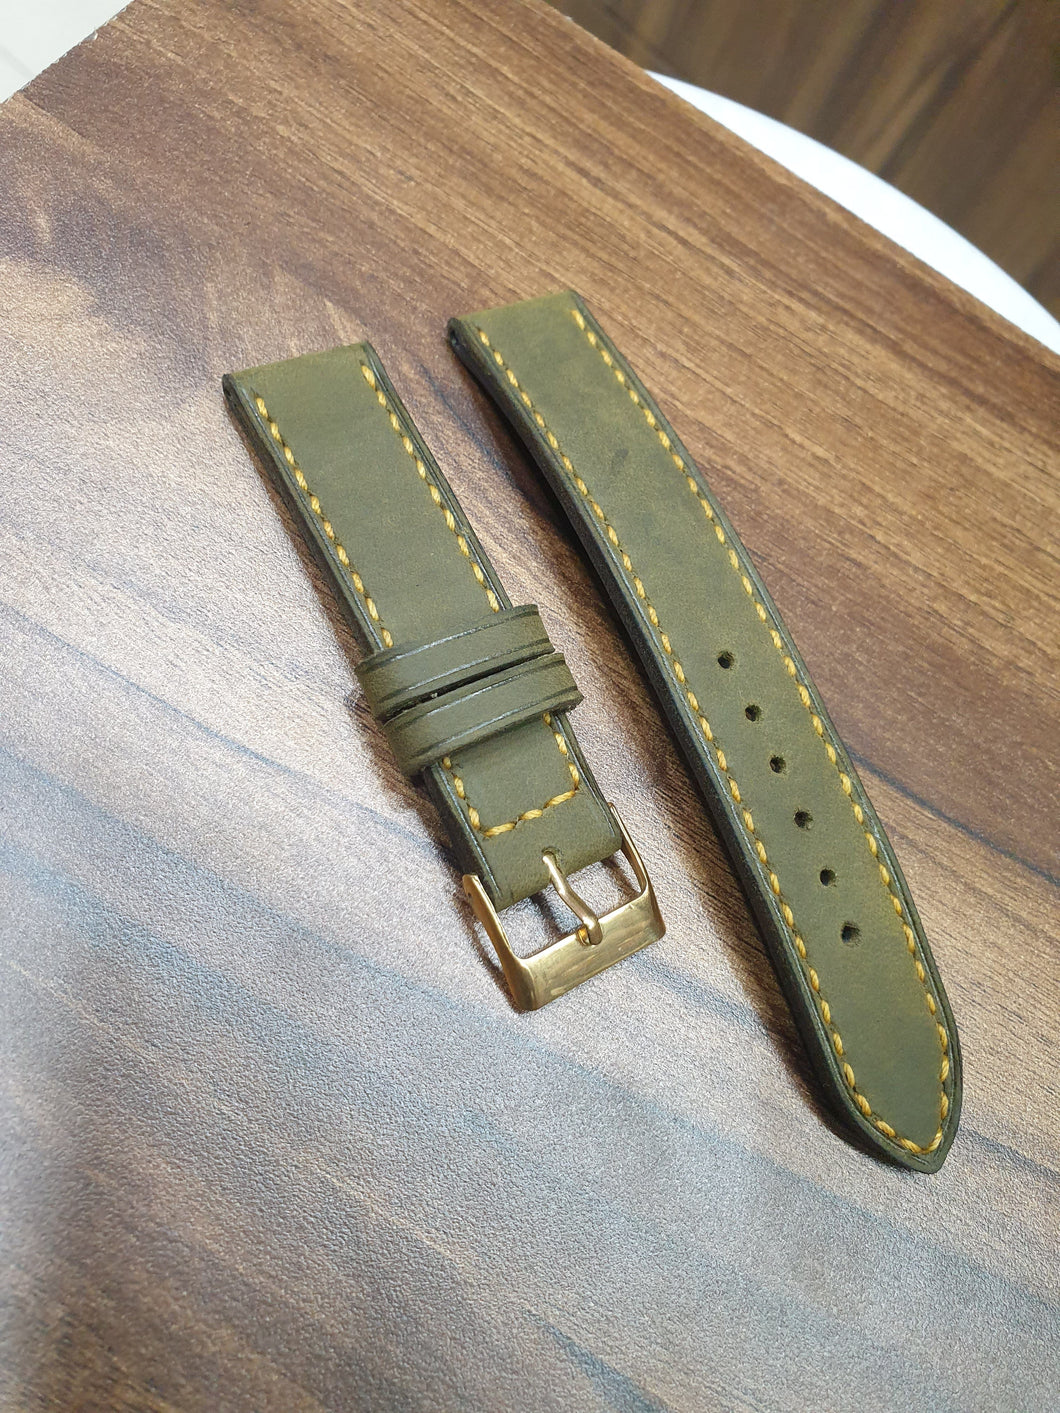 Indianleathercraft 18mm Handmade olive green leather strap